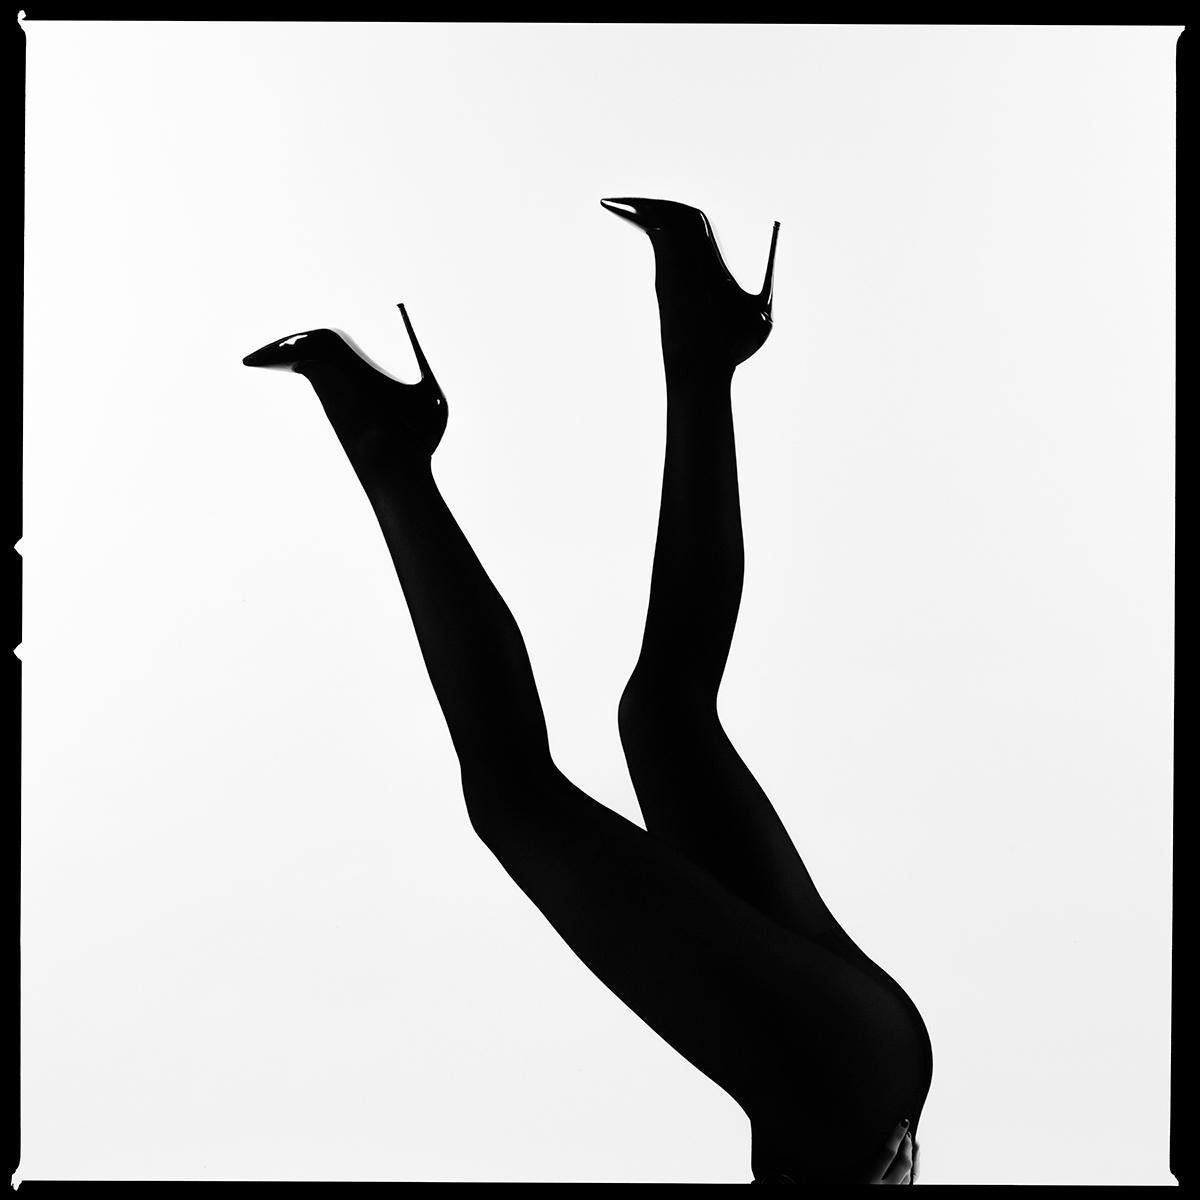 Tyler Shields - Legs Up Silhouette, Photography 2020, Printed After